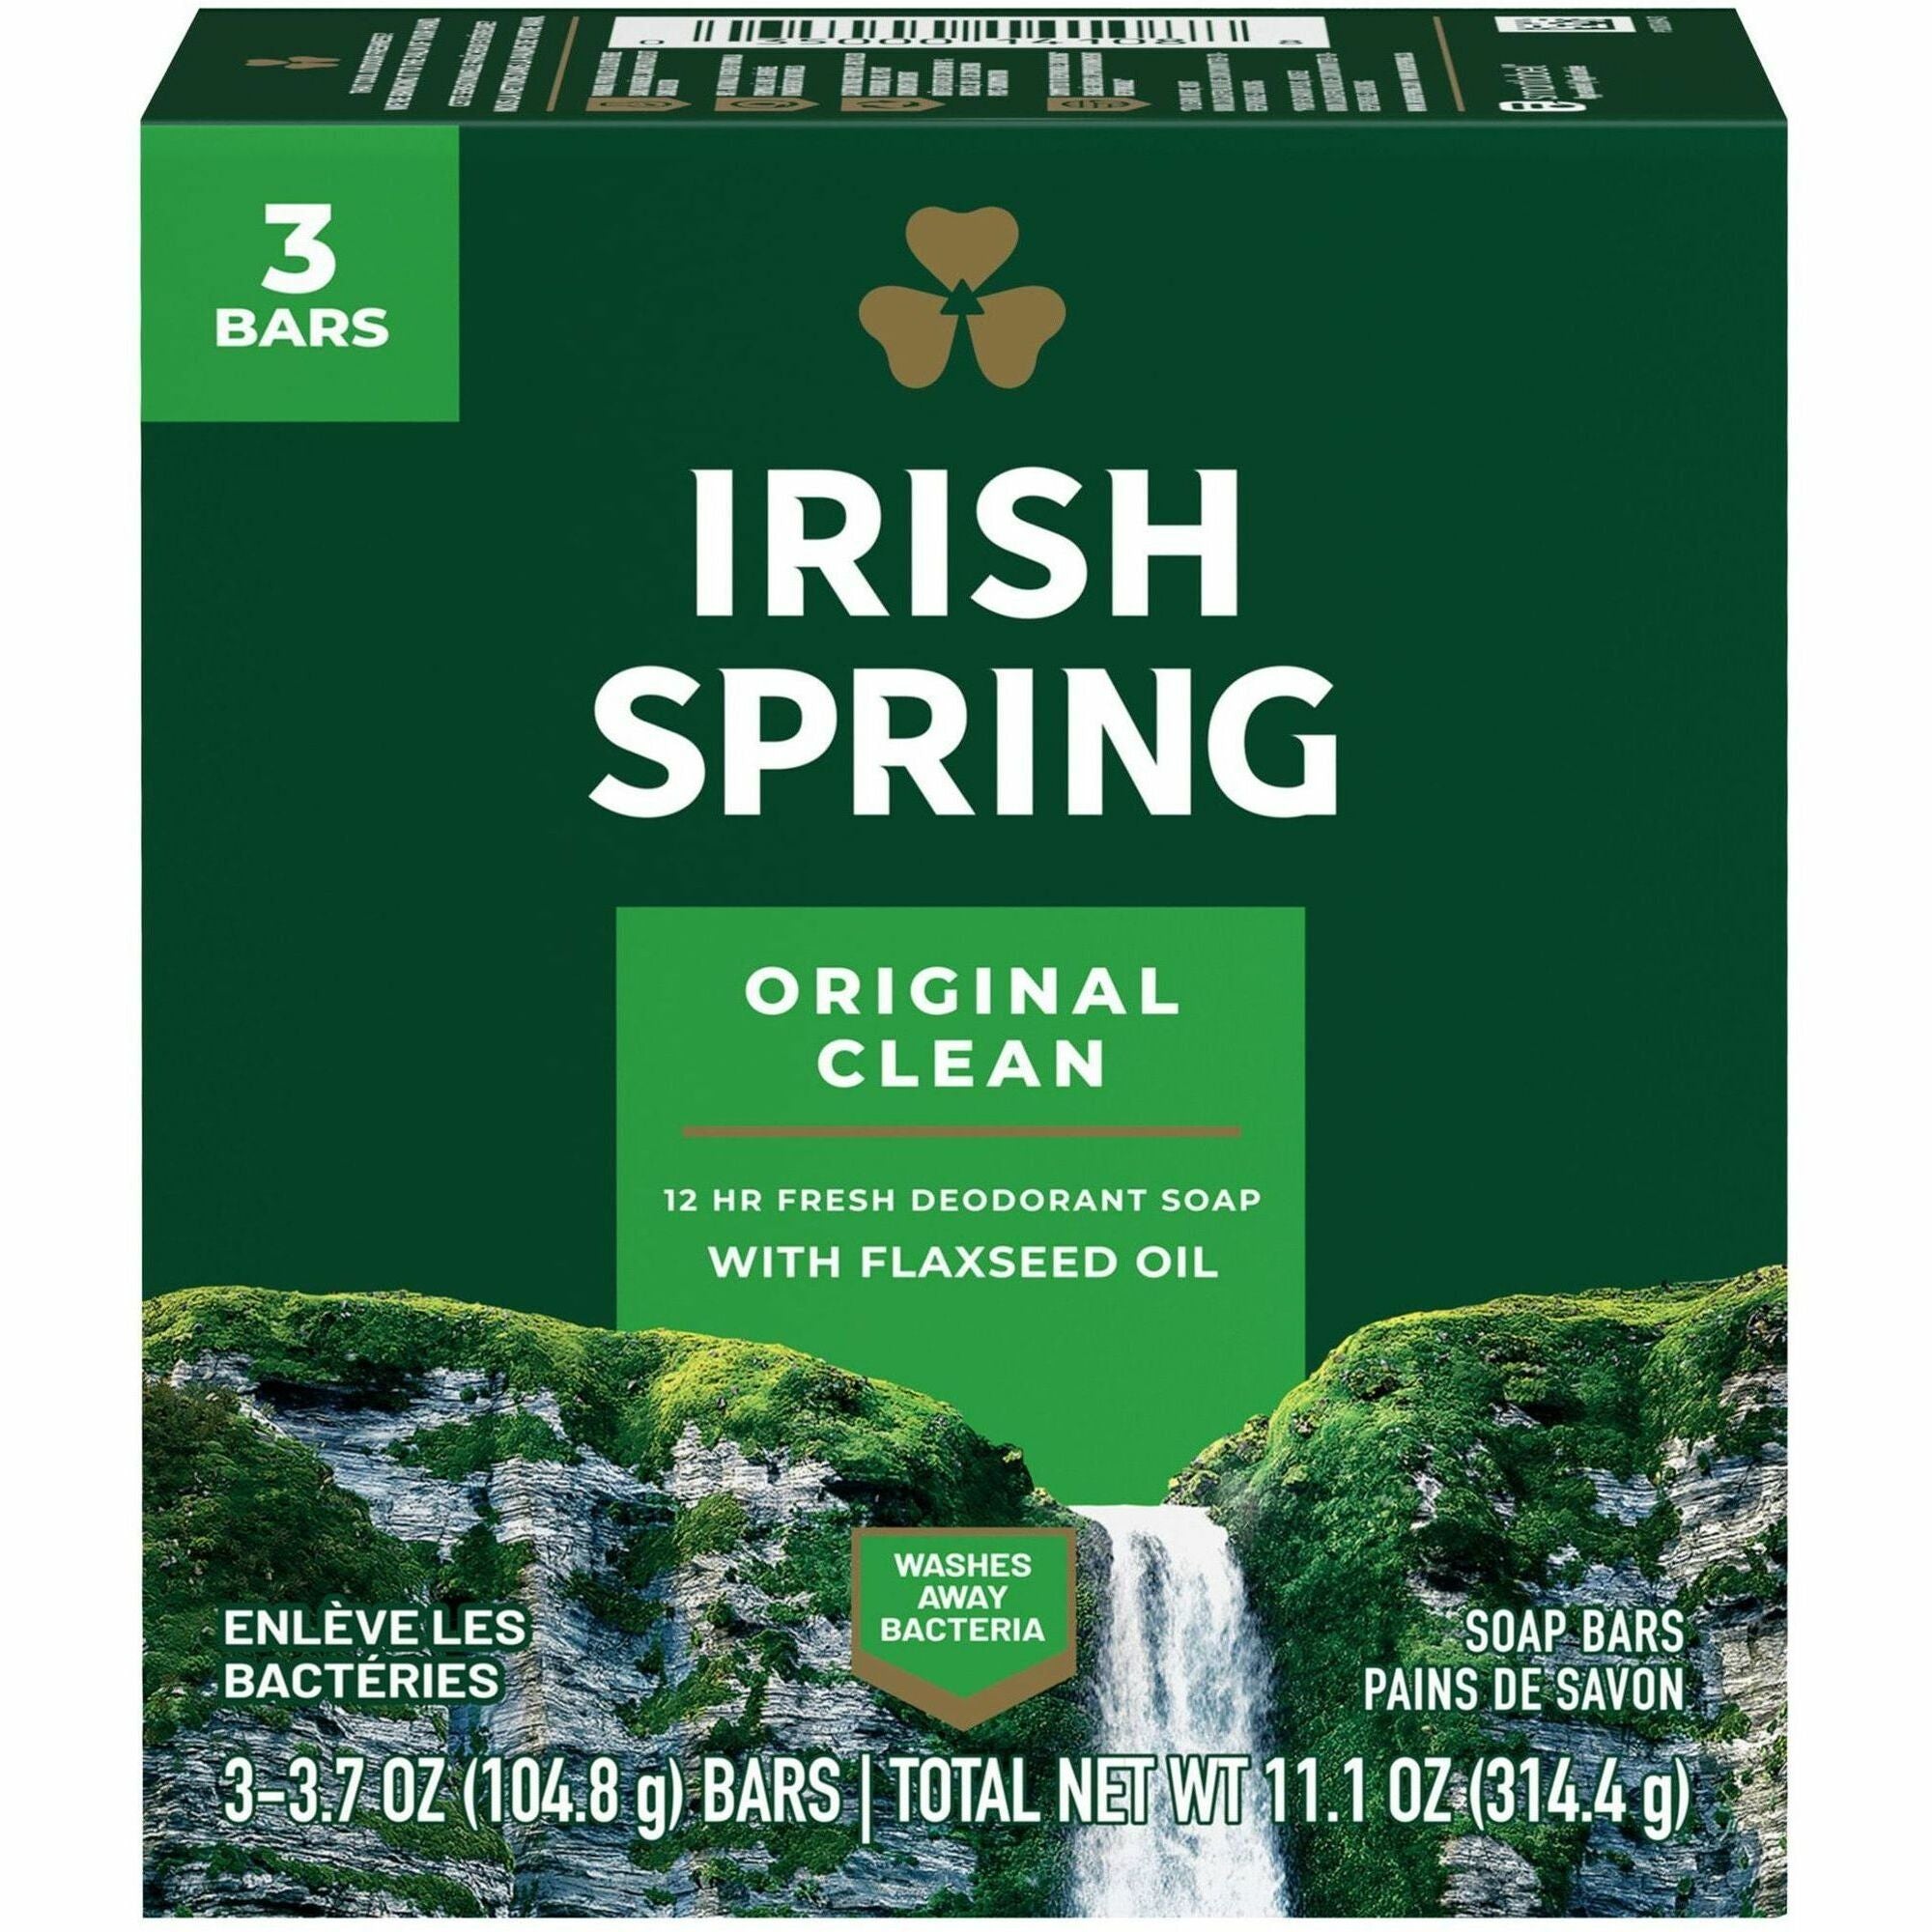 irish-spring-deodorant-bar-soap-with-flaxseed-oil-original-clean-scentfor-375-oz-bacteria-remover-skin-hand-green-paraben-free-phthalate-free-gluten-free-recyclable-18-carton_cpc114177ct - 1